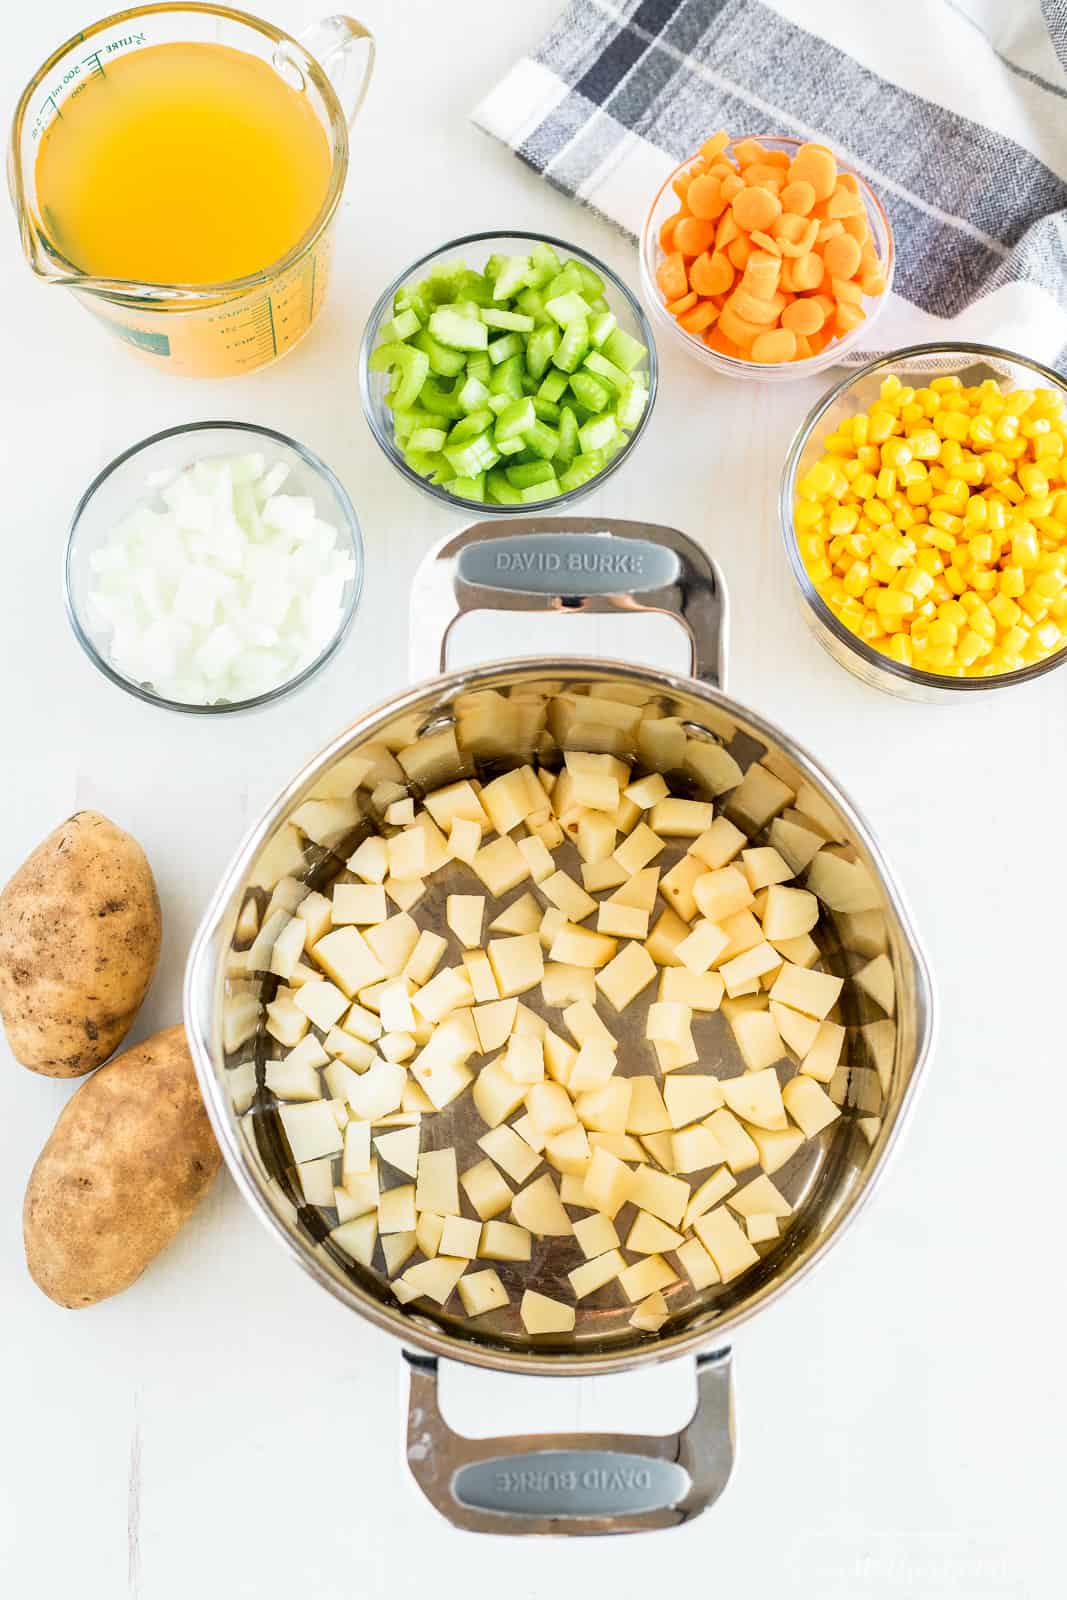 Ingredients for corn chowder soup